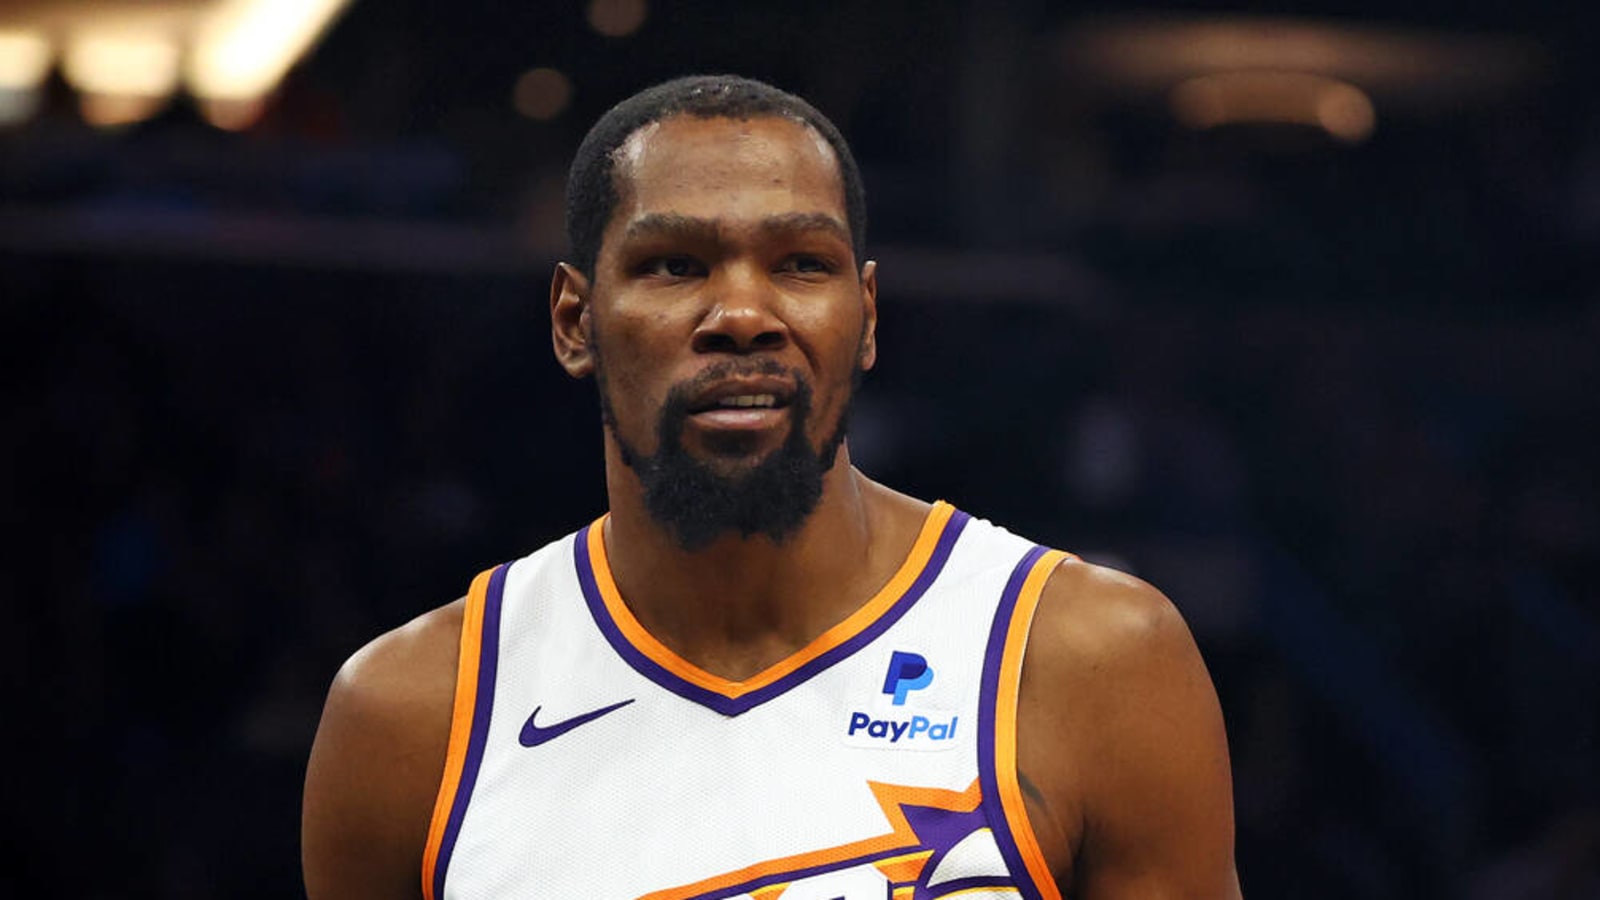 Kevin Durant calls out former teammate for 'only flaw' comment